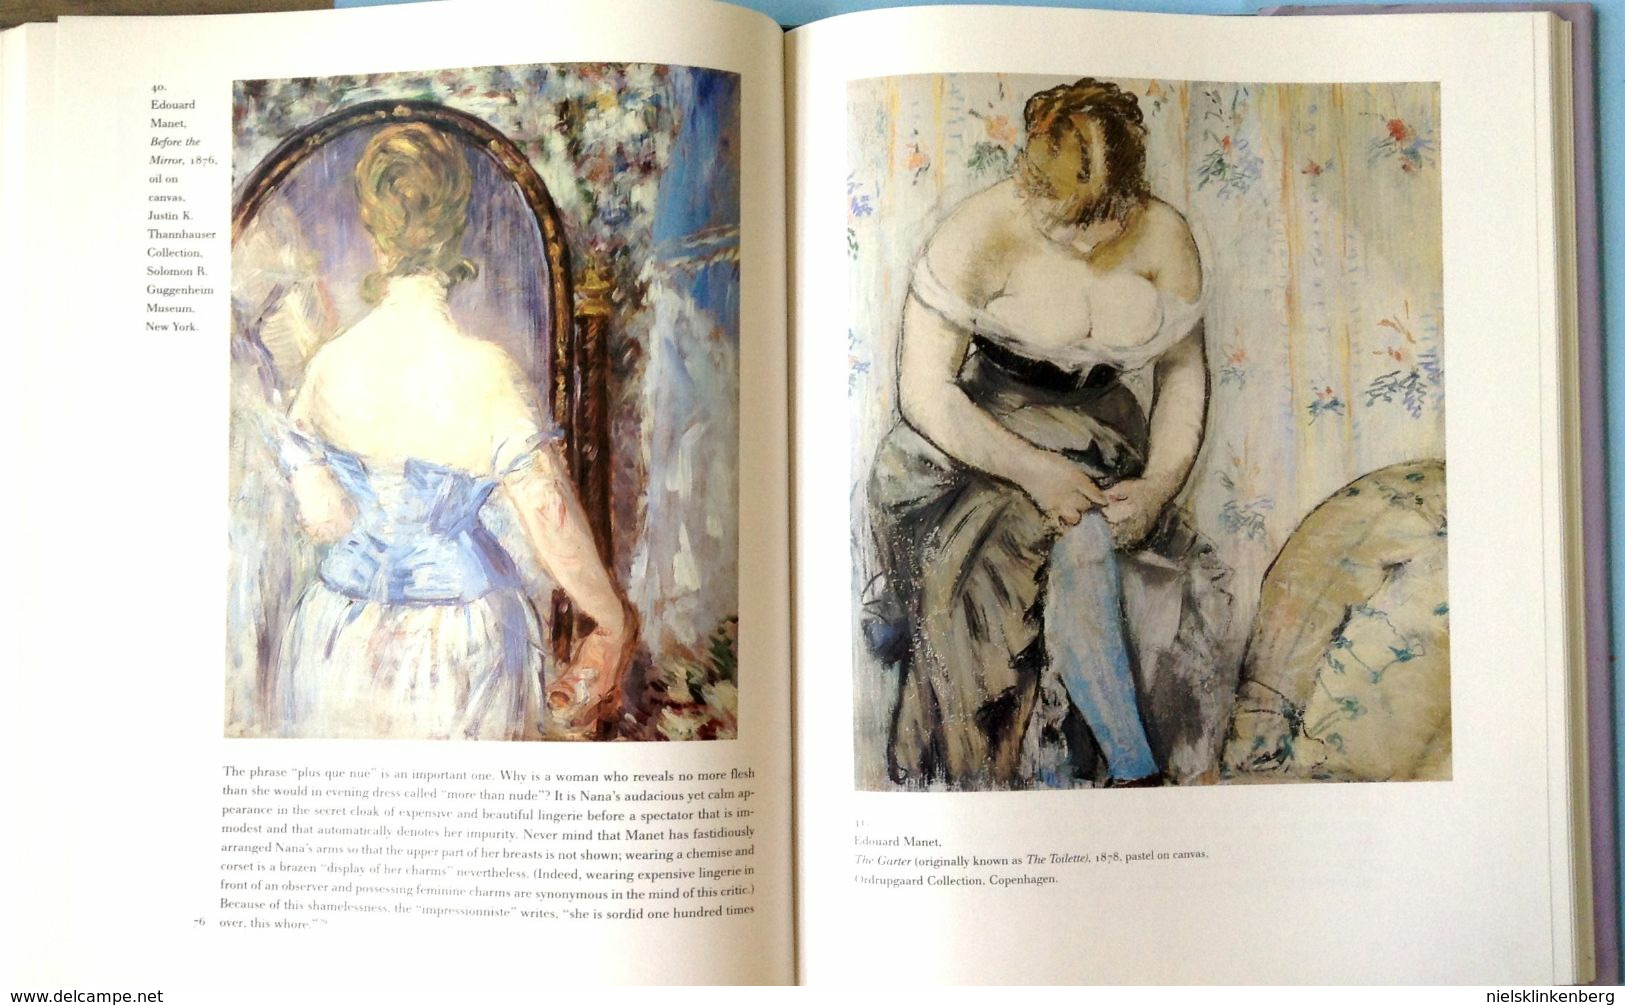 Hollis Clayton PAINTED LOVE: PROSTITUTION IN FRENCH ART OF IMPRESSIONIST ERA - Fine Arts